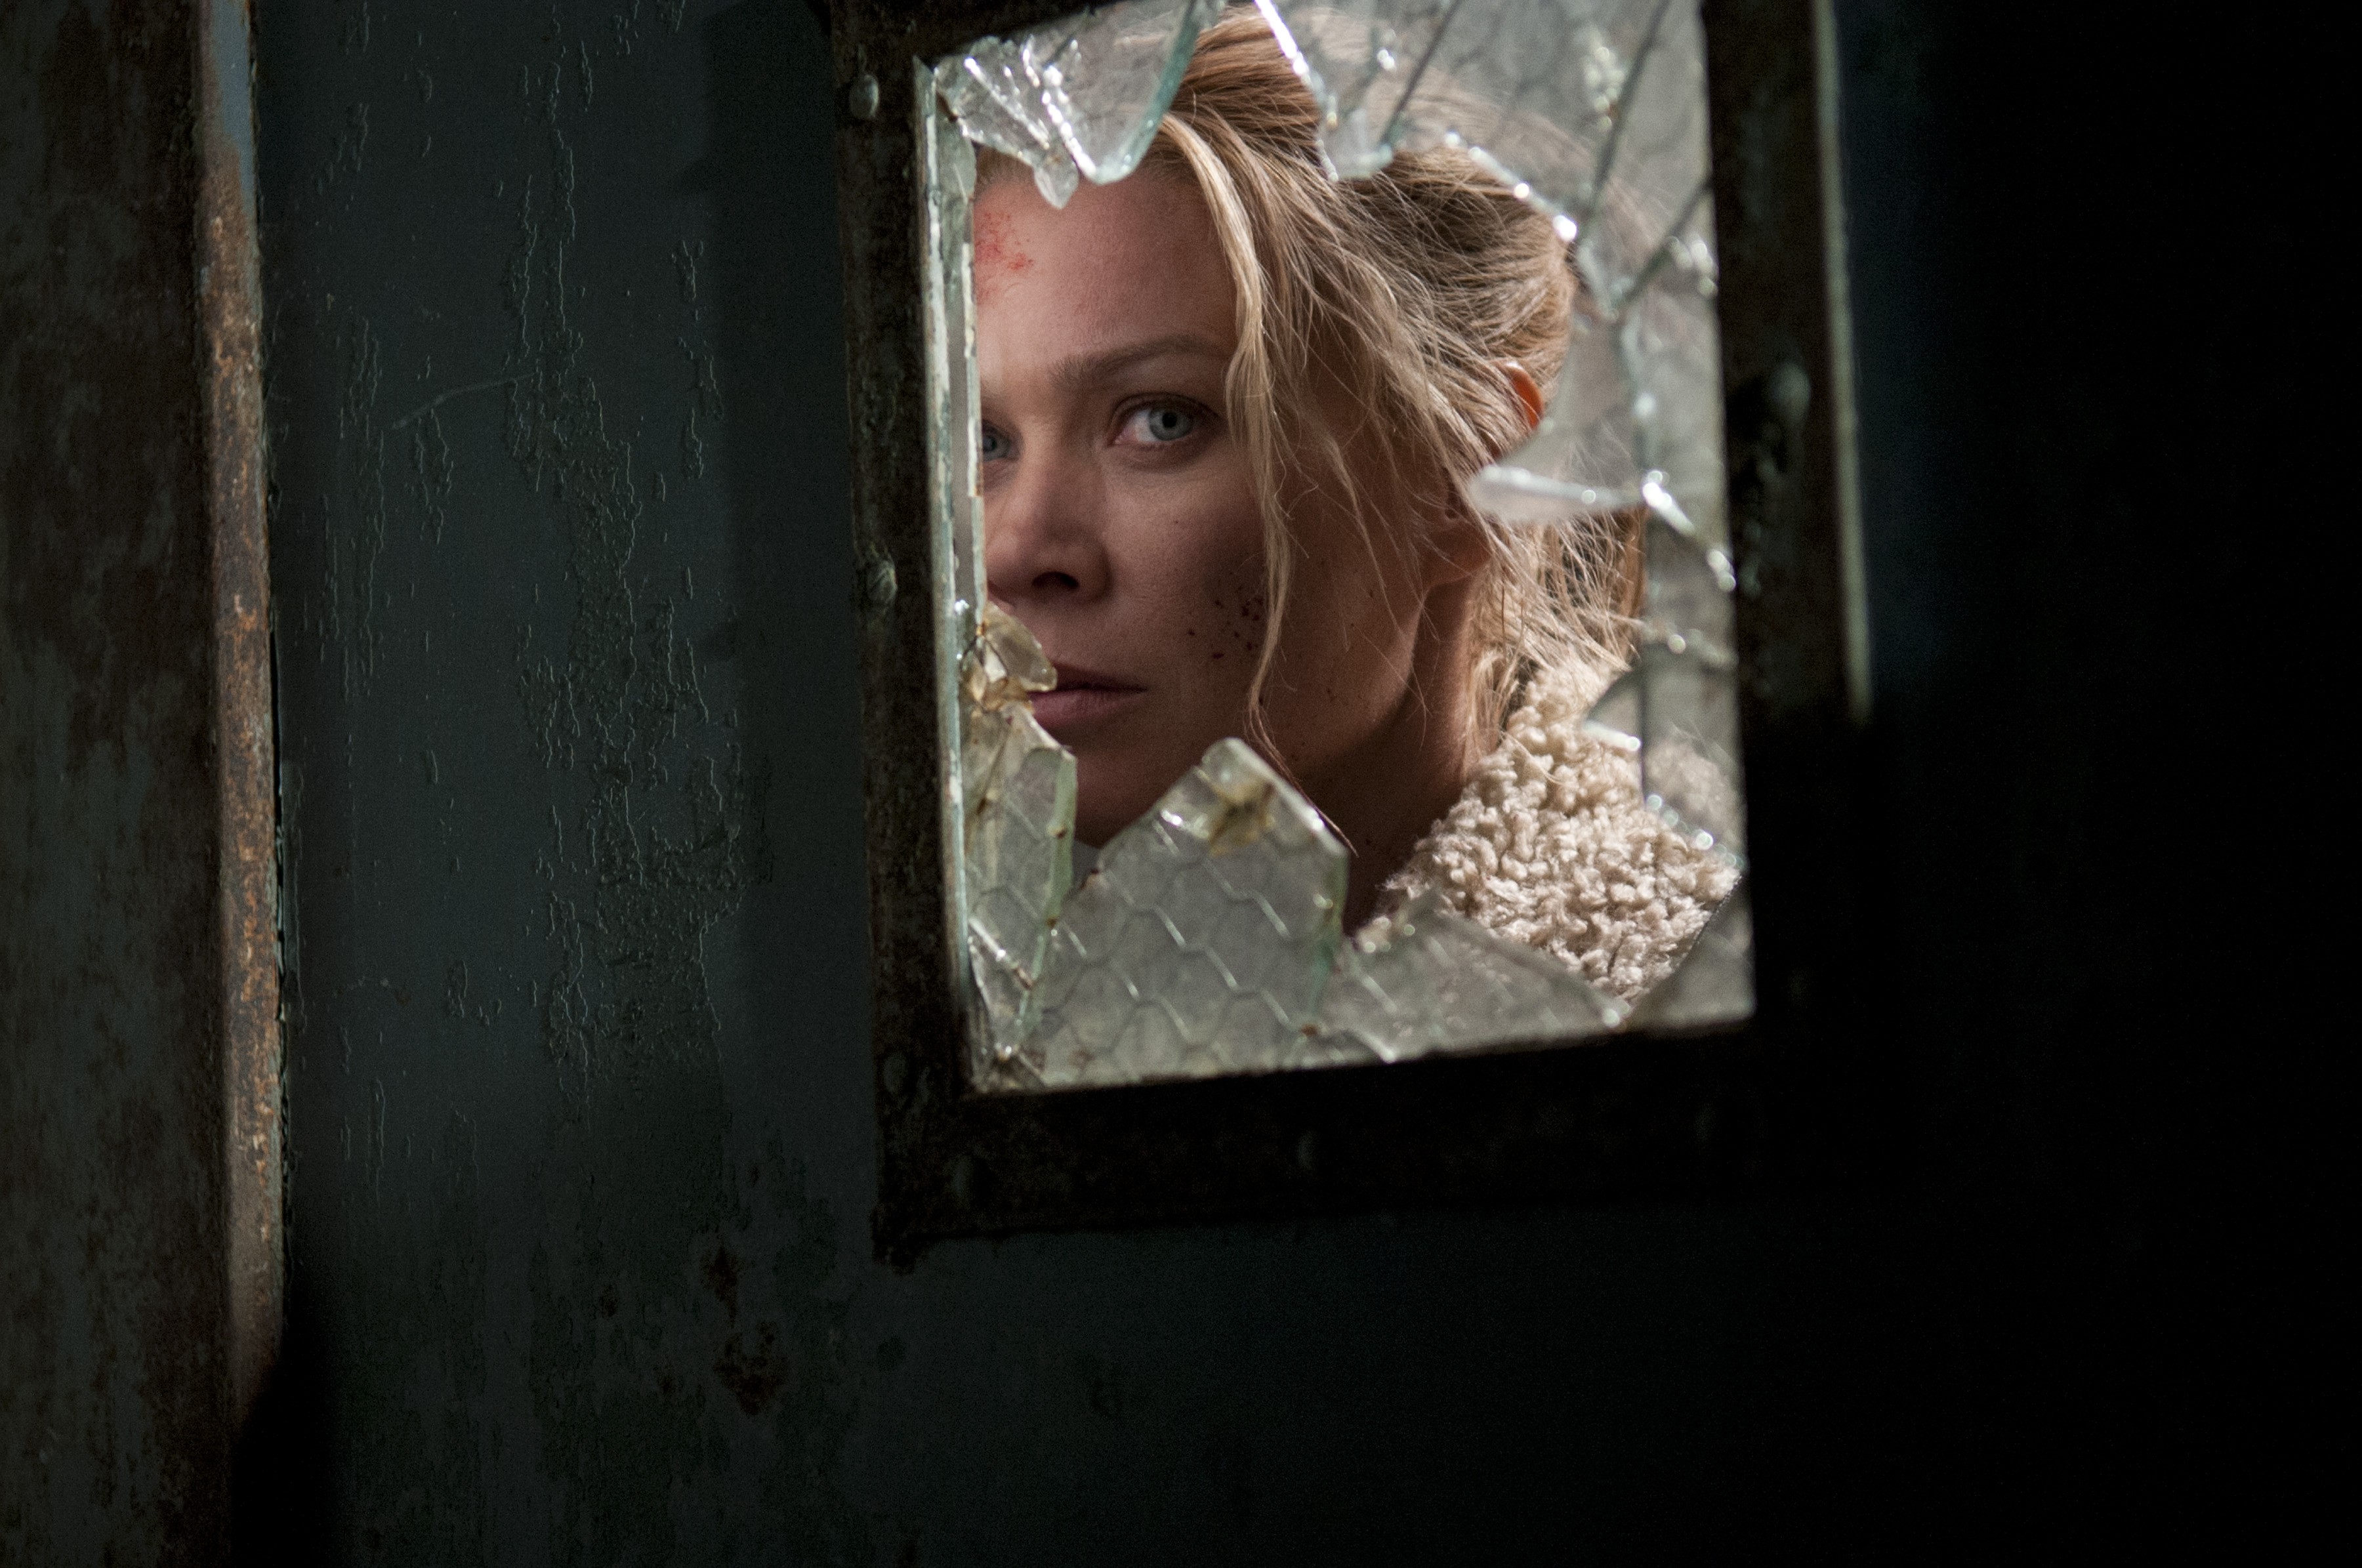 the walking dead, tv show, andrea (the walking dead), laurie holden